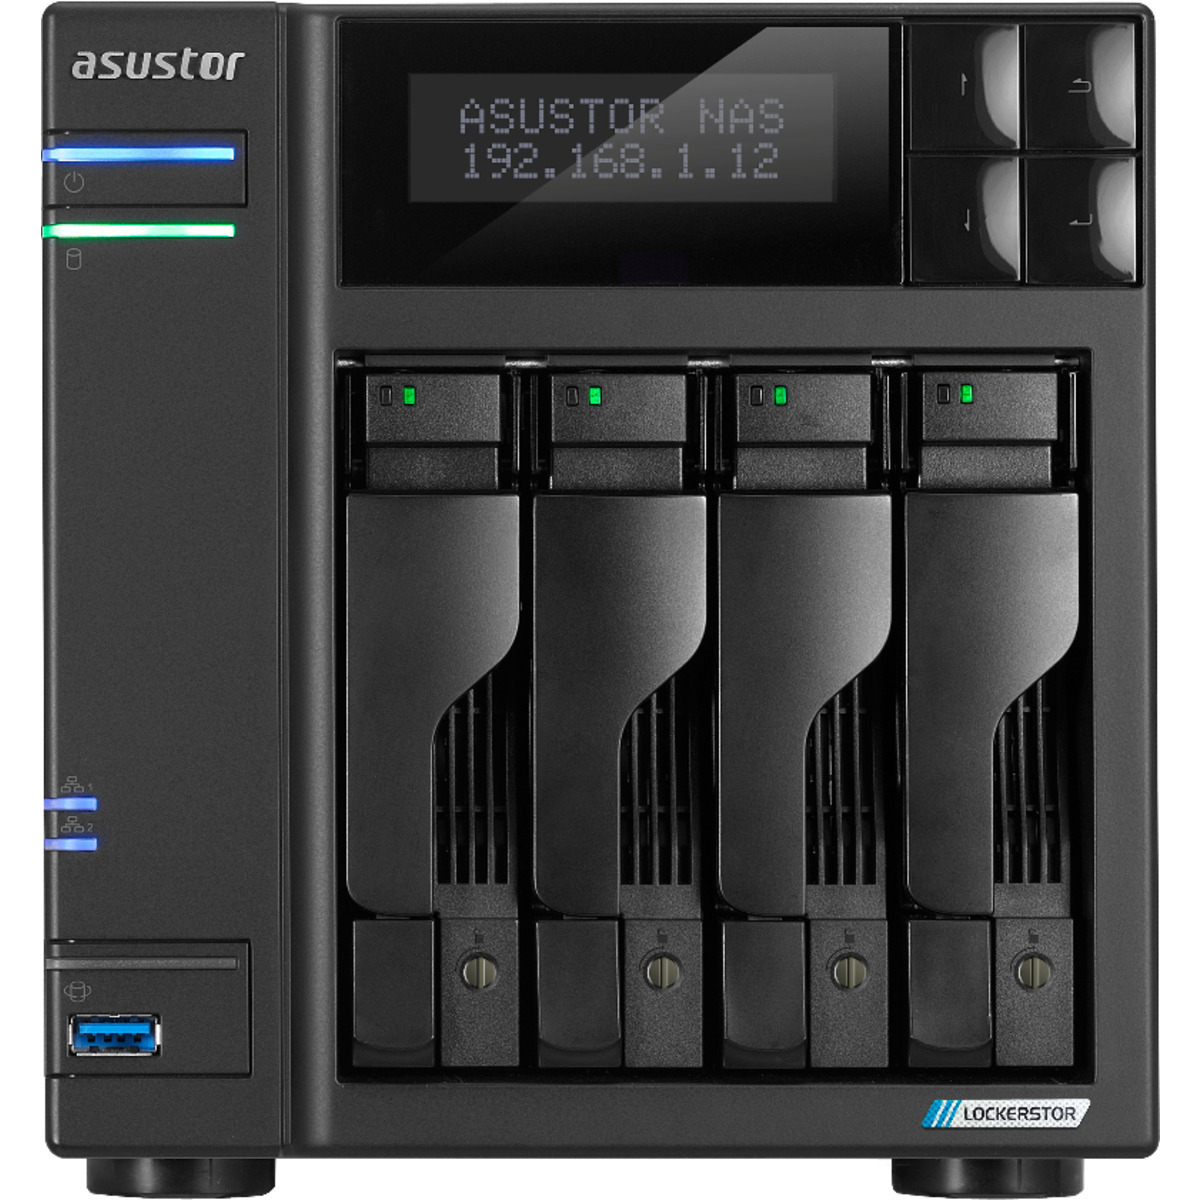 ASUSTOR LOCKERSTOR 4 Gen2 AS6704T 36tb 4-Bay Desktop Multimedia / Power User / Business NAS - Network Attached Storage Device 3x12tb Seagate IronWolf Pro ST12000NT001 3.5 7200rpm SATA 6Gb/s HDD NAS Class Drives Installed - Burn-In Tested - ON SALE - FREE RAM UPGRADE LOCKERSTOR 4 Gen2 AS6704T